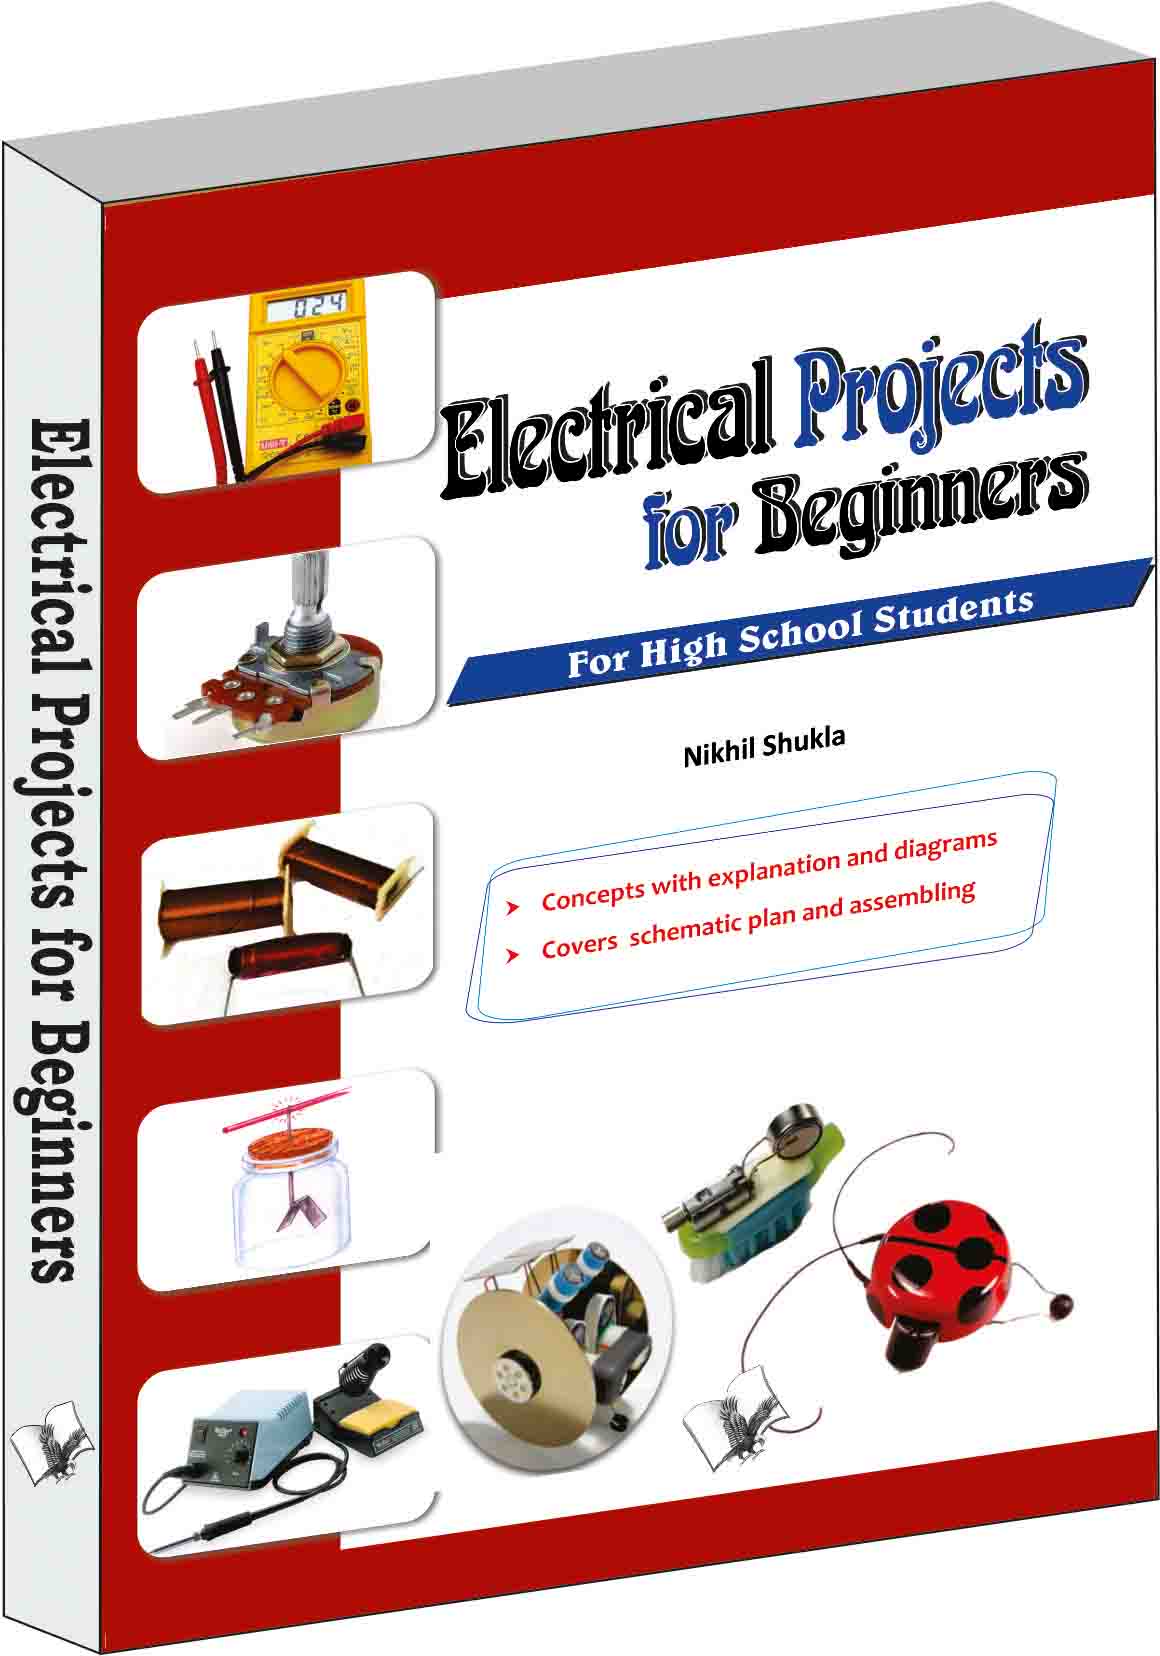 Electrical Projects for Beginners-New projects for high school students